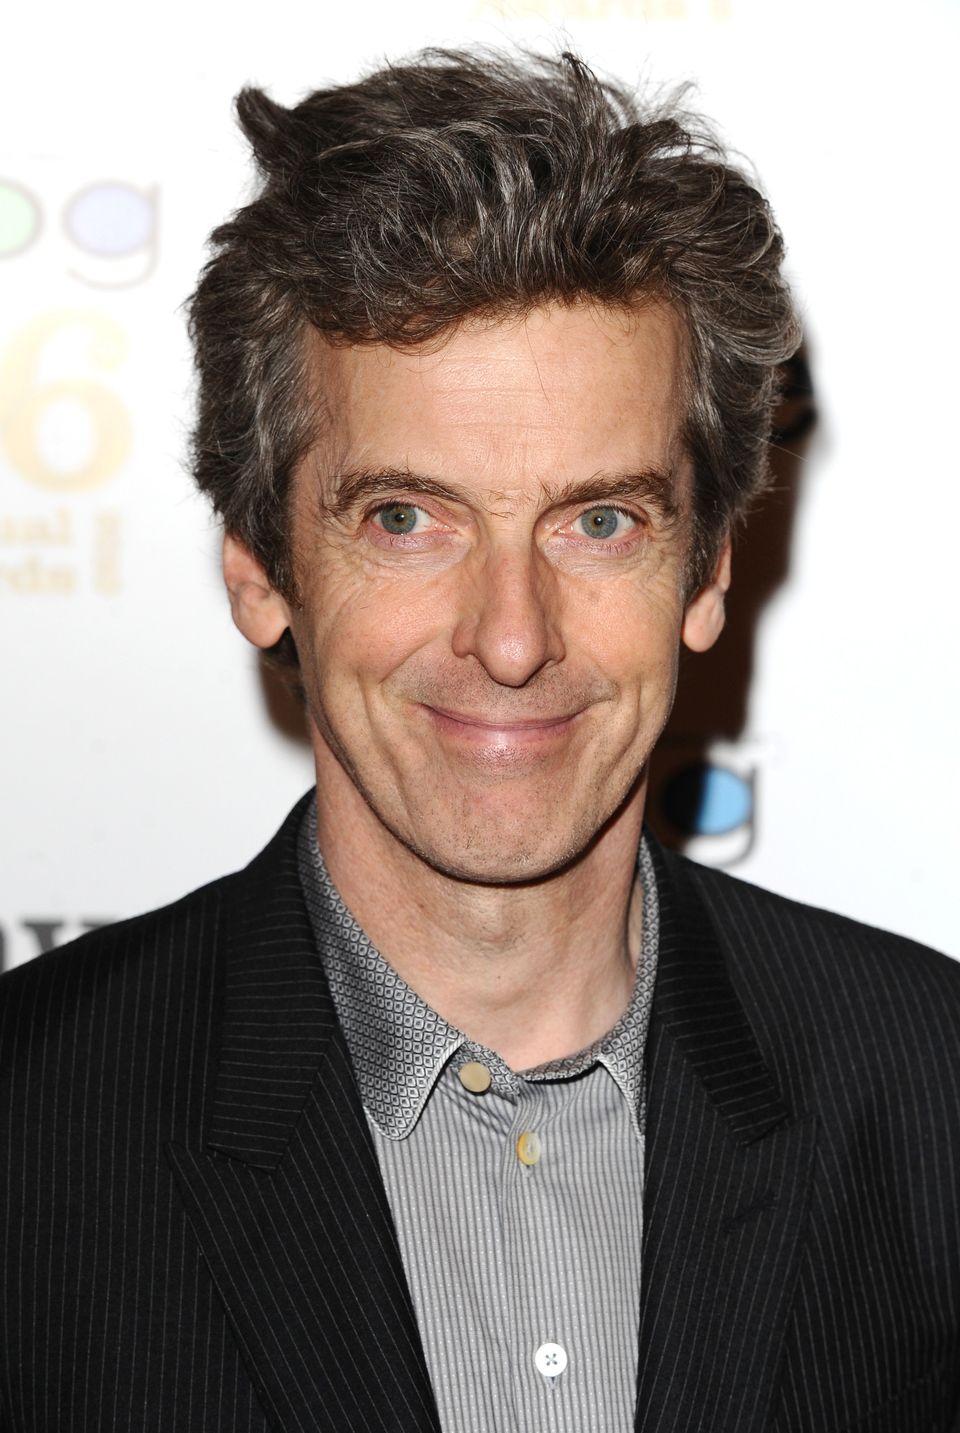 Peter Capaldi: 9 Facts in 90 Seconds